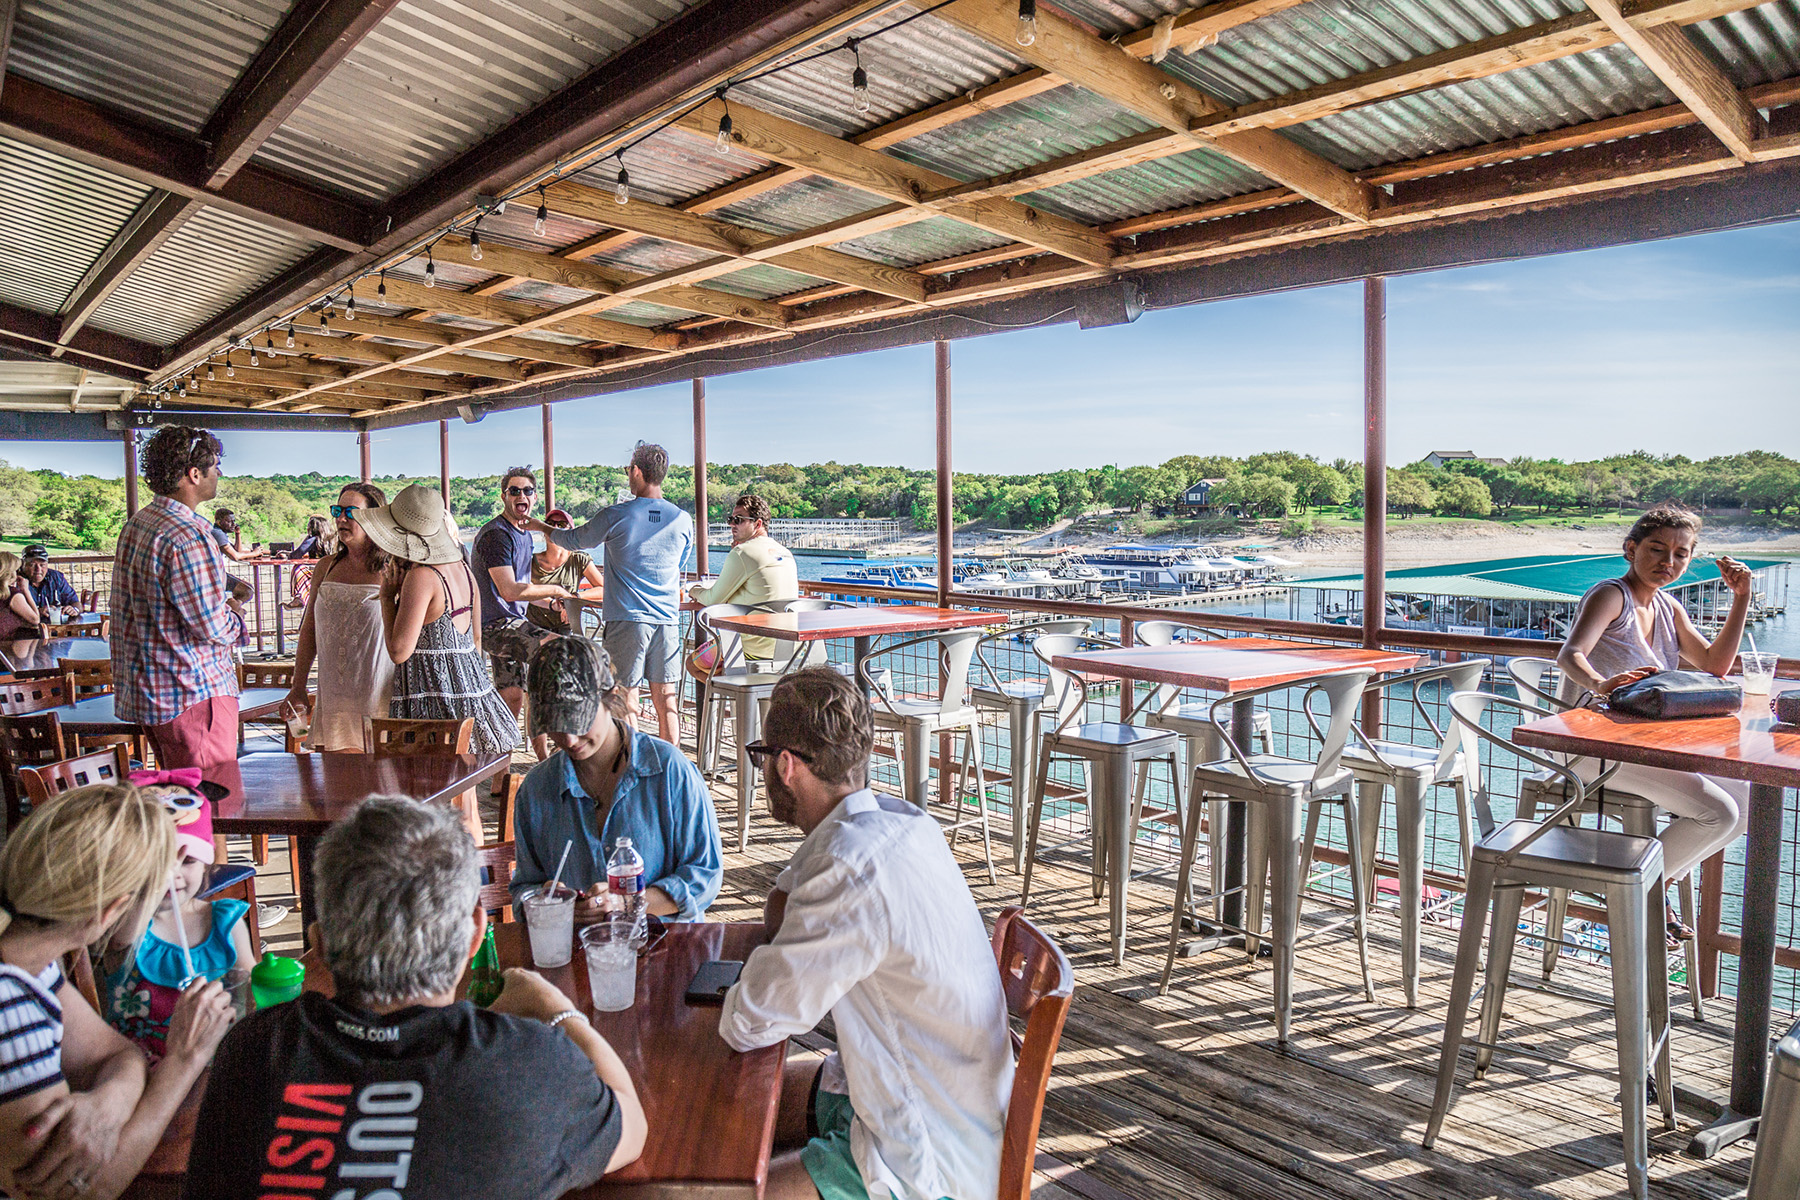 Emerald Point Bar and Grill - Lakefront Lake Travis Restaurant and Bar